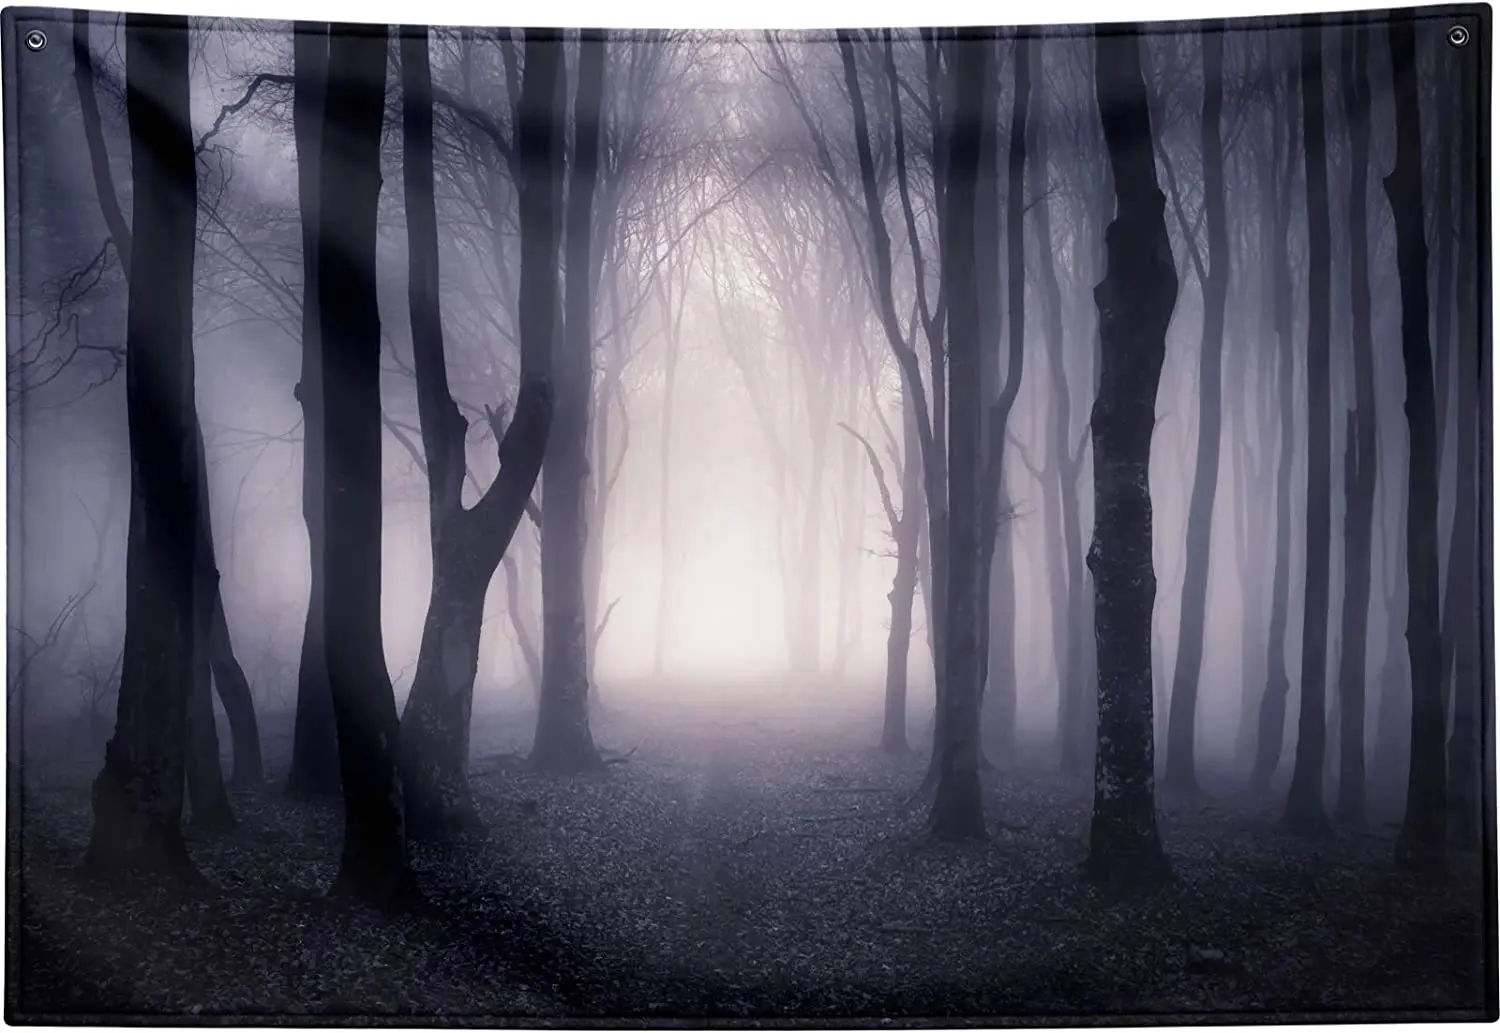 

Misty Forest Tapestry Wall Hanging Scary Fantasy Foggy Forest Backdrop Dark Fantasy Woods Landscape Gothic Decor Tapestry